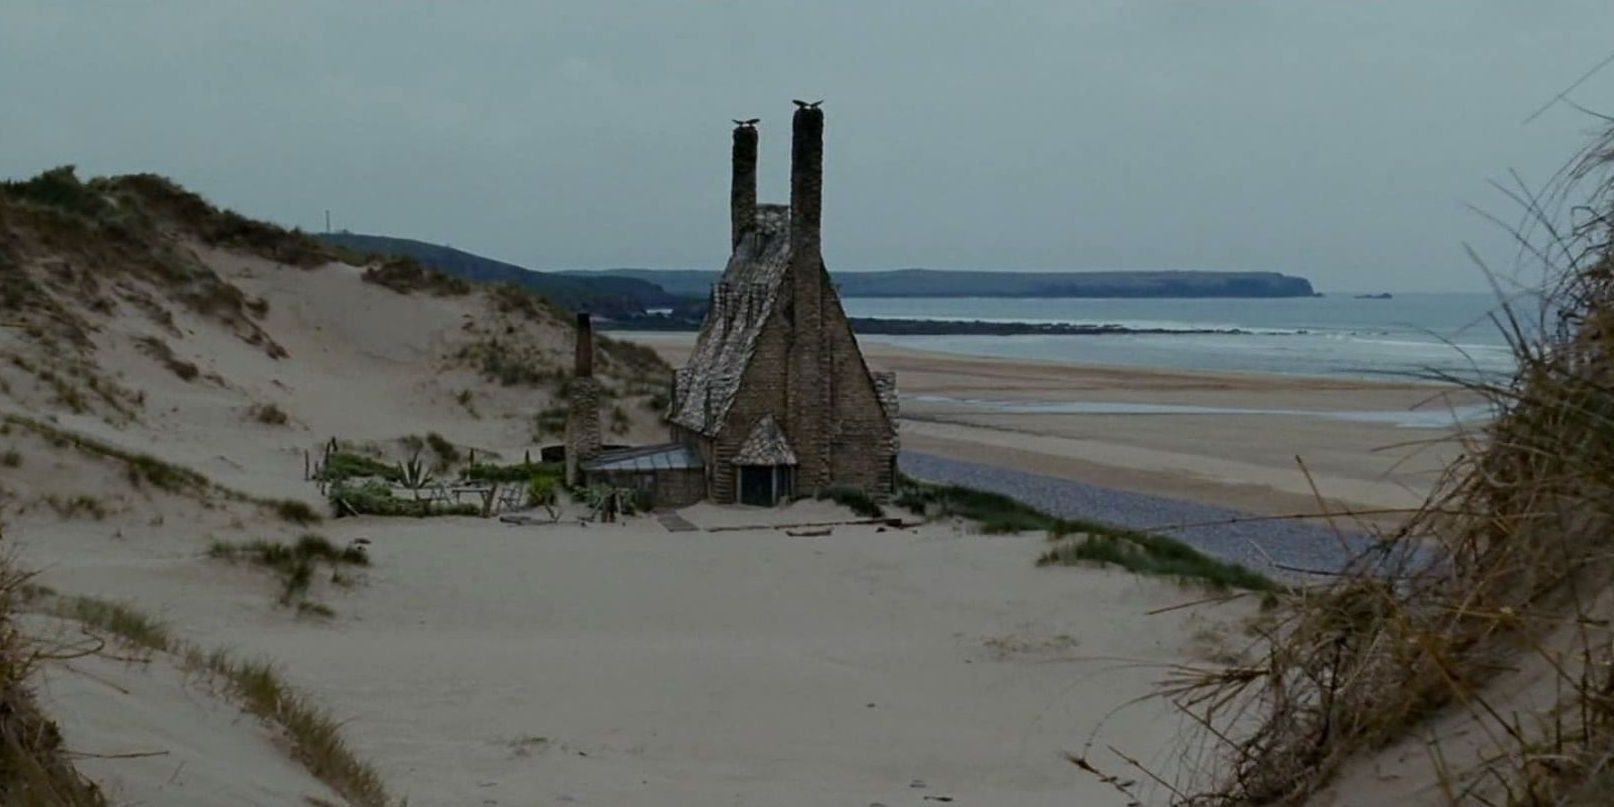 shell cottage from harry potter. Based near the sea, it's a building with two tall towers.